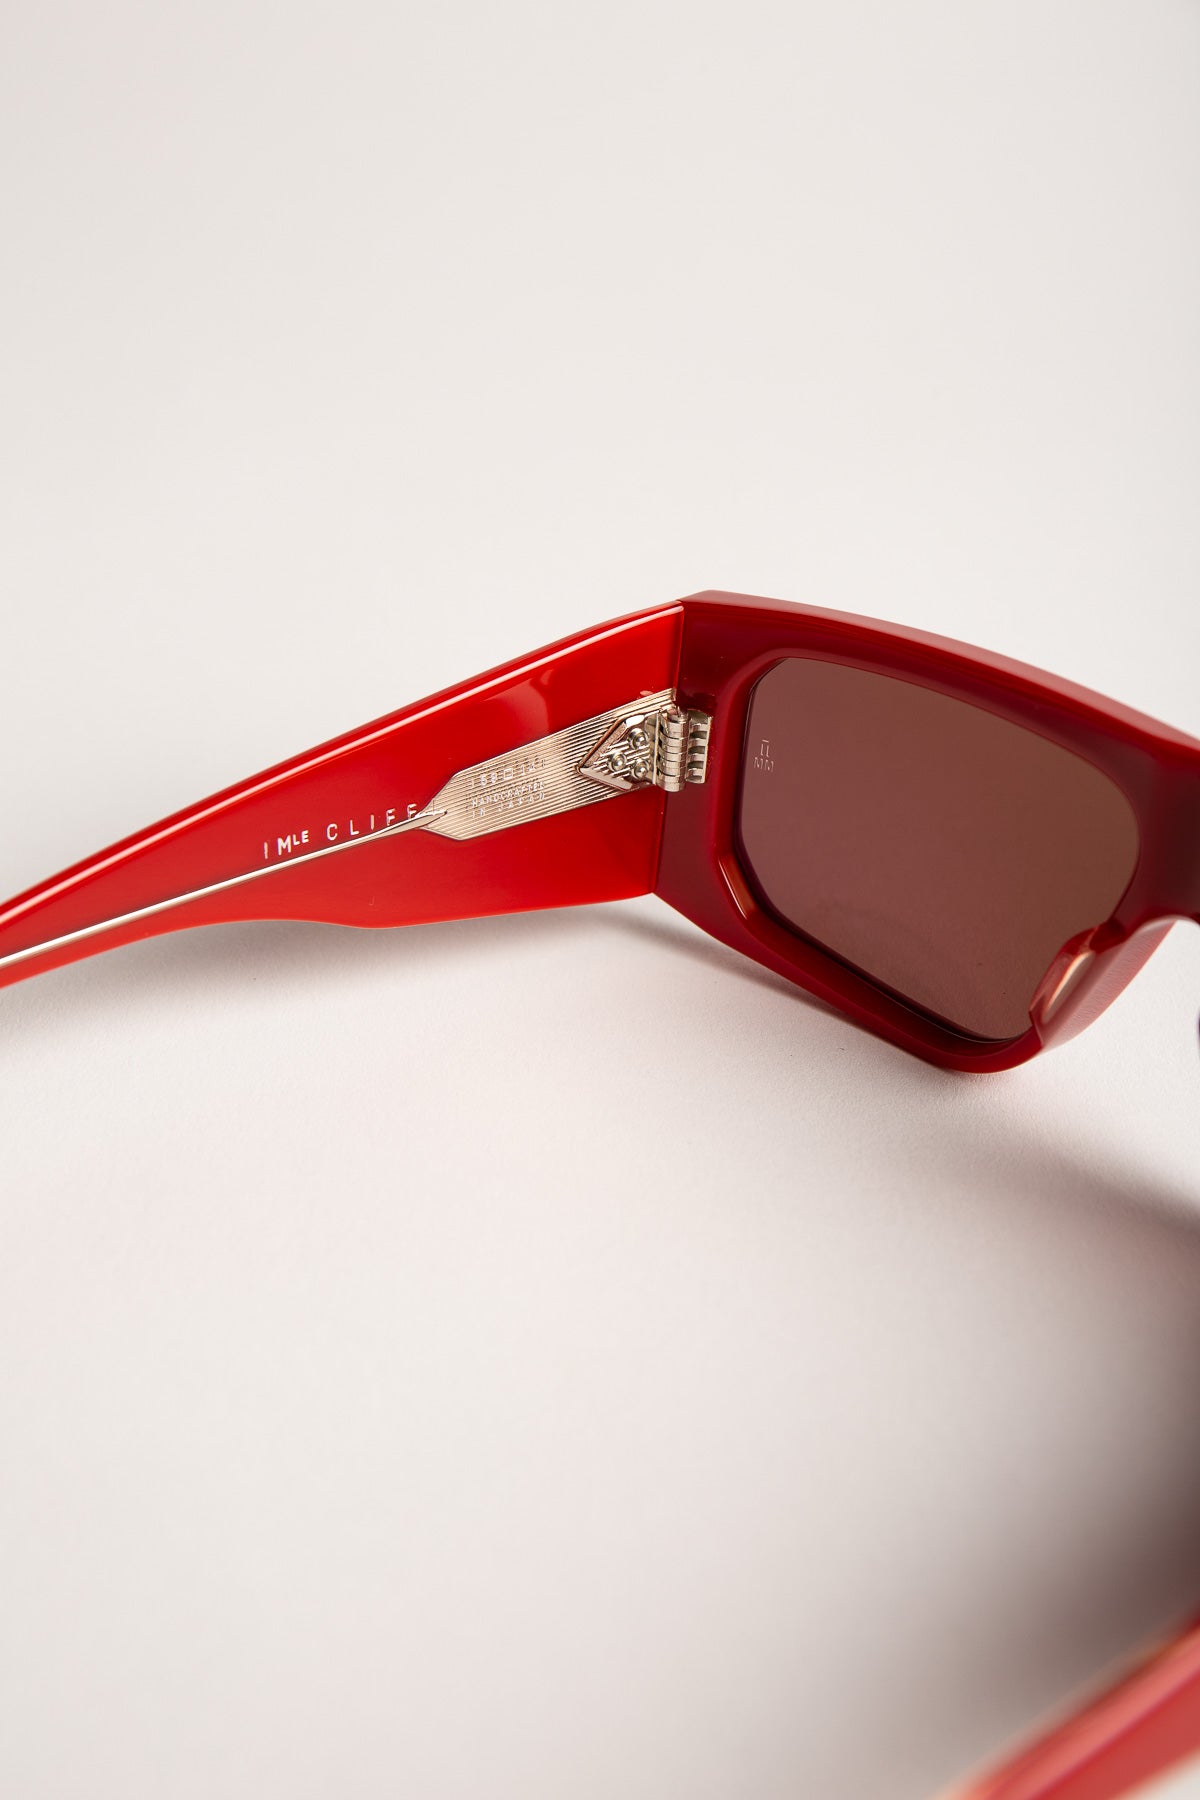 JACQUES MARIE MAGE | CLIFF SUNGLASSES